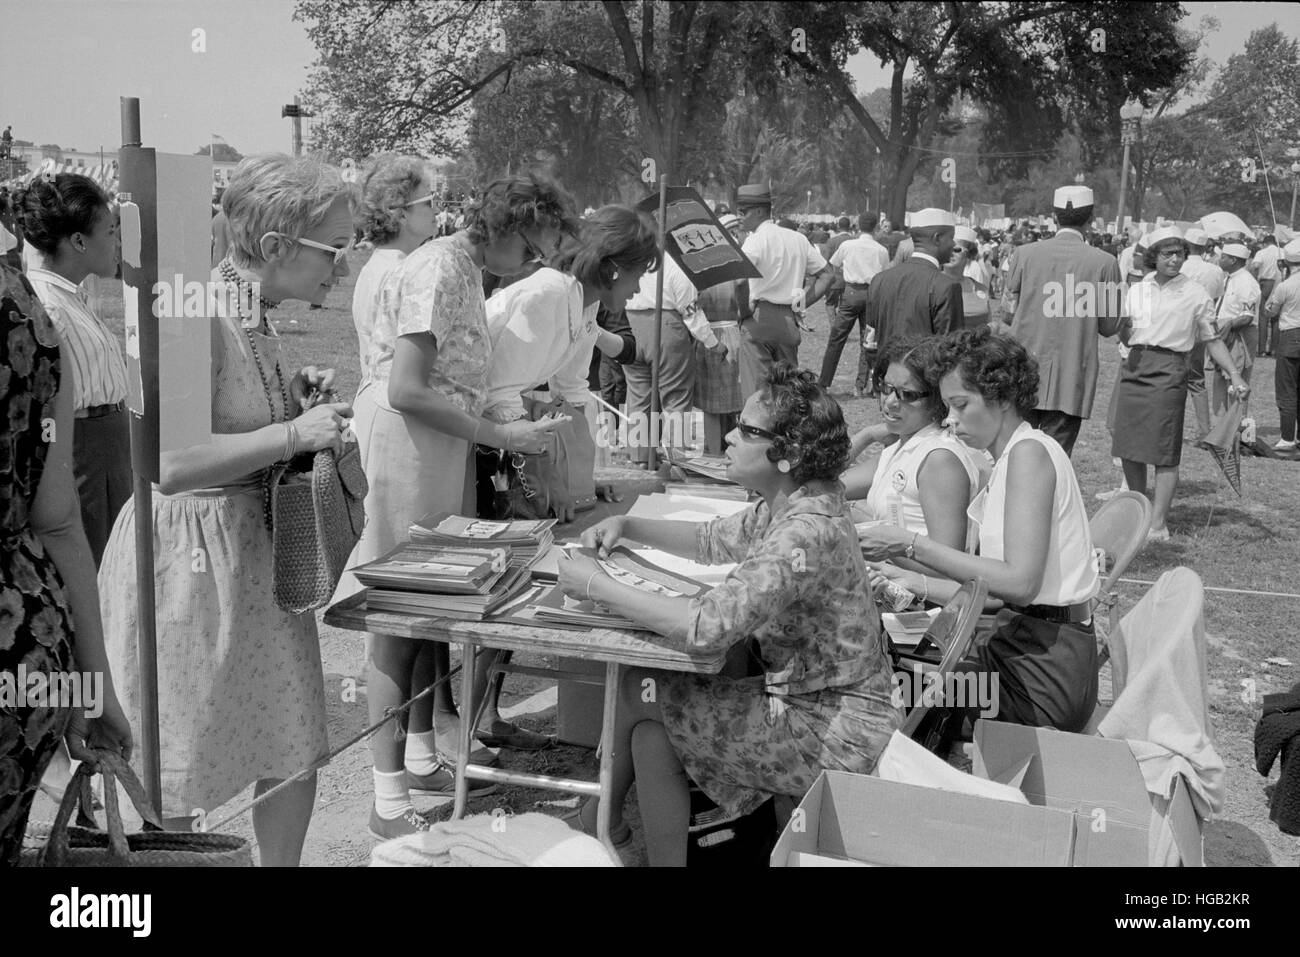 August 28, 1963 - Souvenir booklet sales table at the March on Washington. Stock Photo